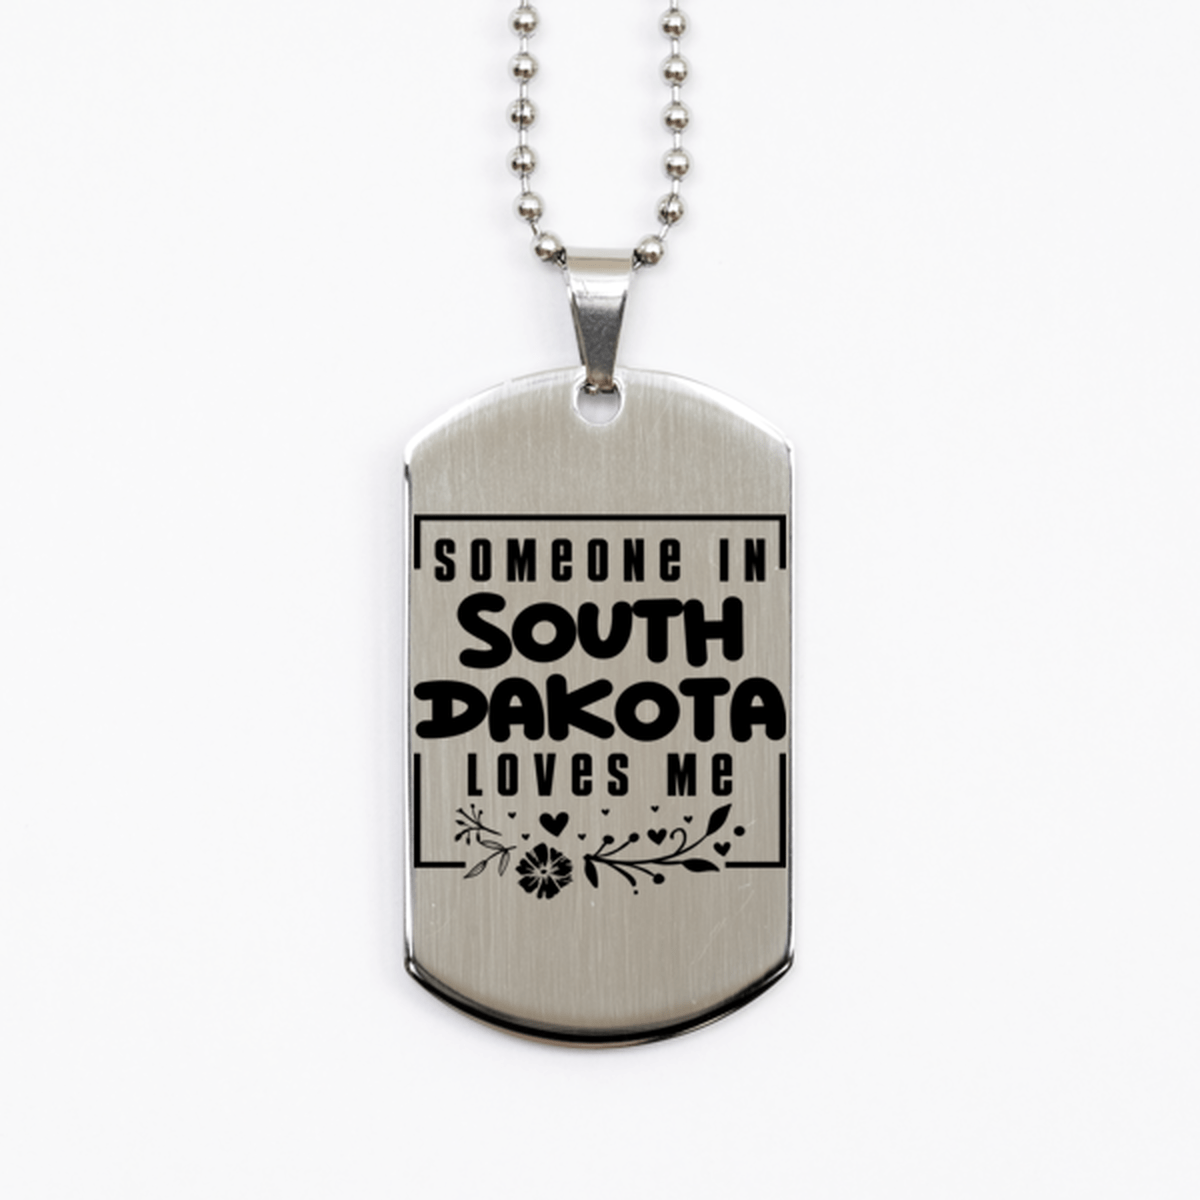 Cute South Dakota Silver Dog Tag Necklace, Someone in South Dakota Loves Me, Best Birthday Gifts from South Dakota Friends & Family